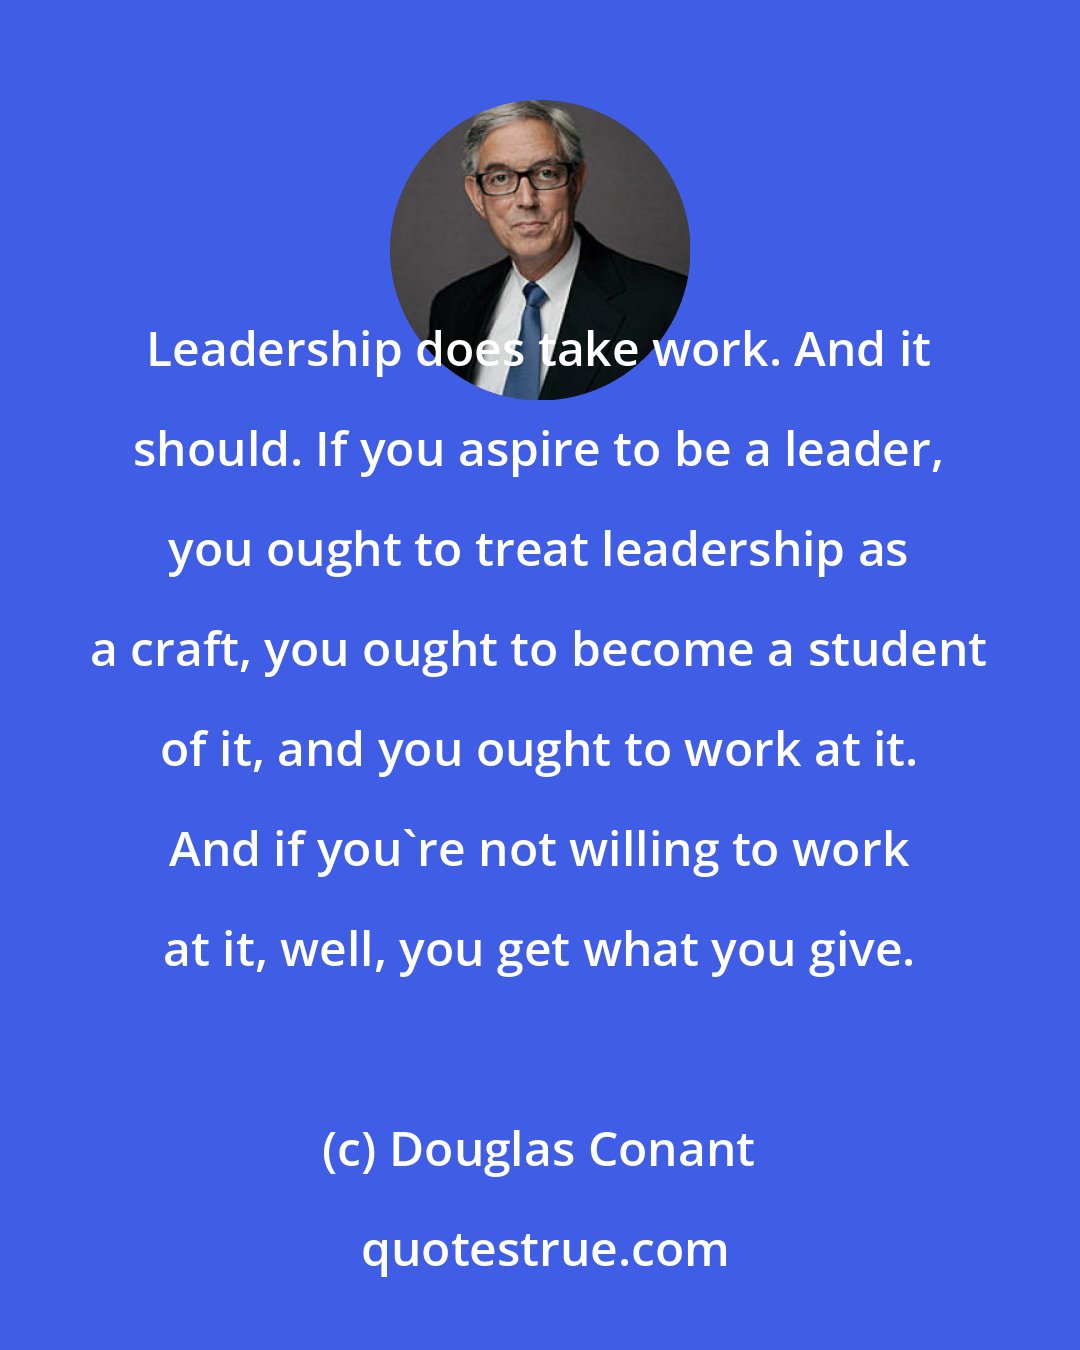 Douglas Conant: Leadership does take work. And it should. If you aspire to be a leader, you ought to treat leadership as a craft, you ought to become a student of it, and you ought to work at it. And if you're not willing to work at it, well, you get what you give.